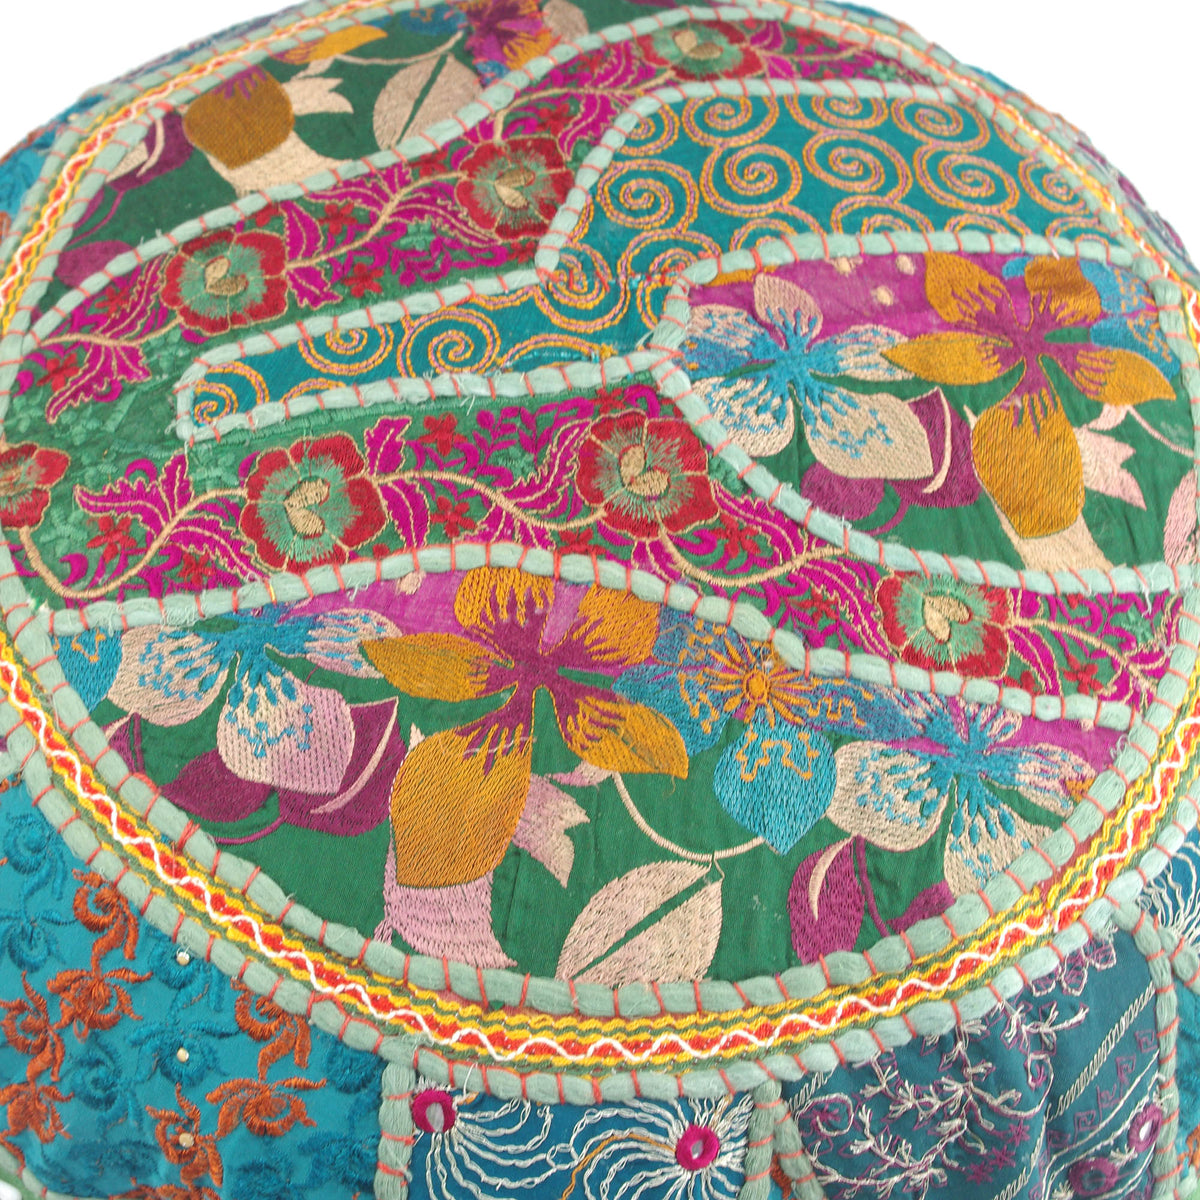 Round Floor Embroidered Patchwork Pouf Ottoman Indian Vintage Cushion Cover 22"